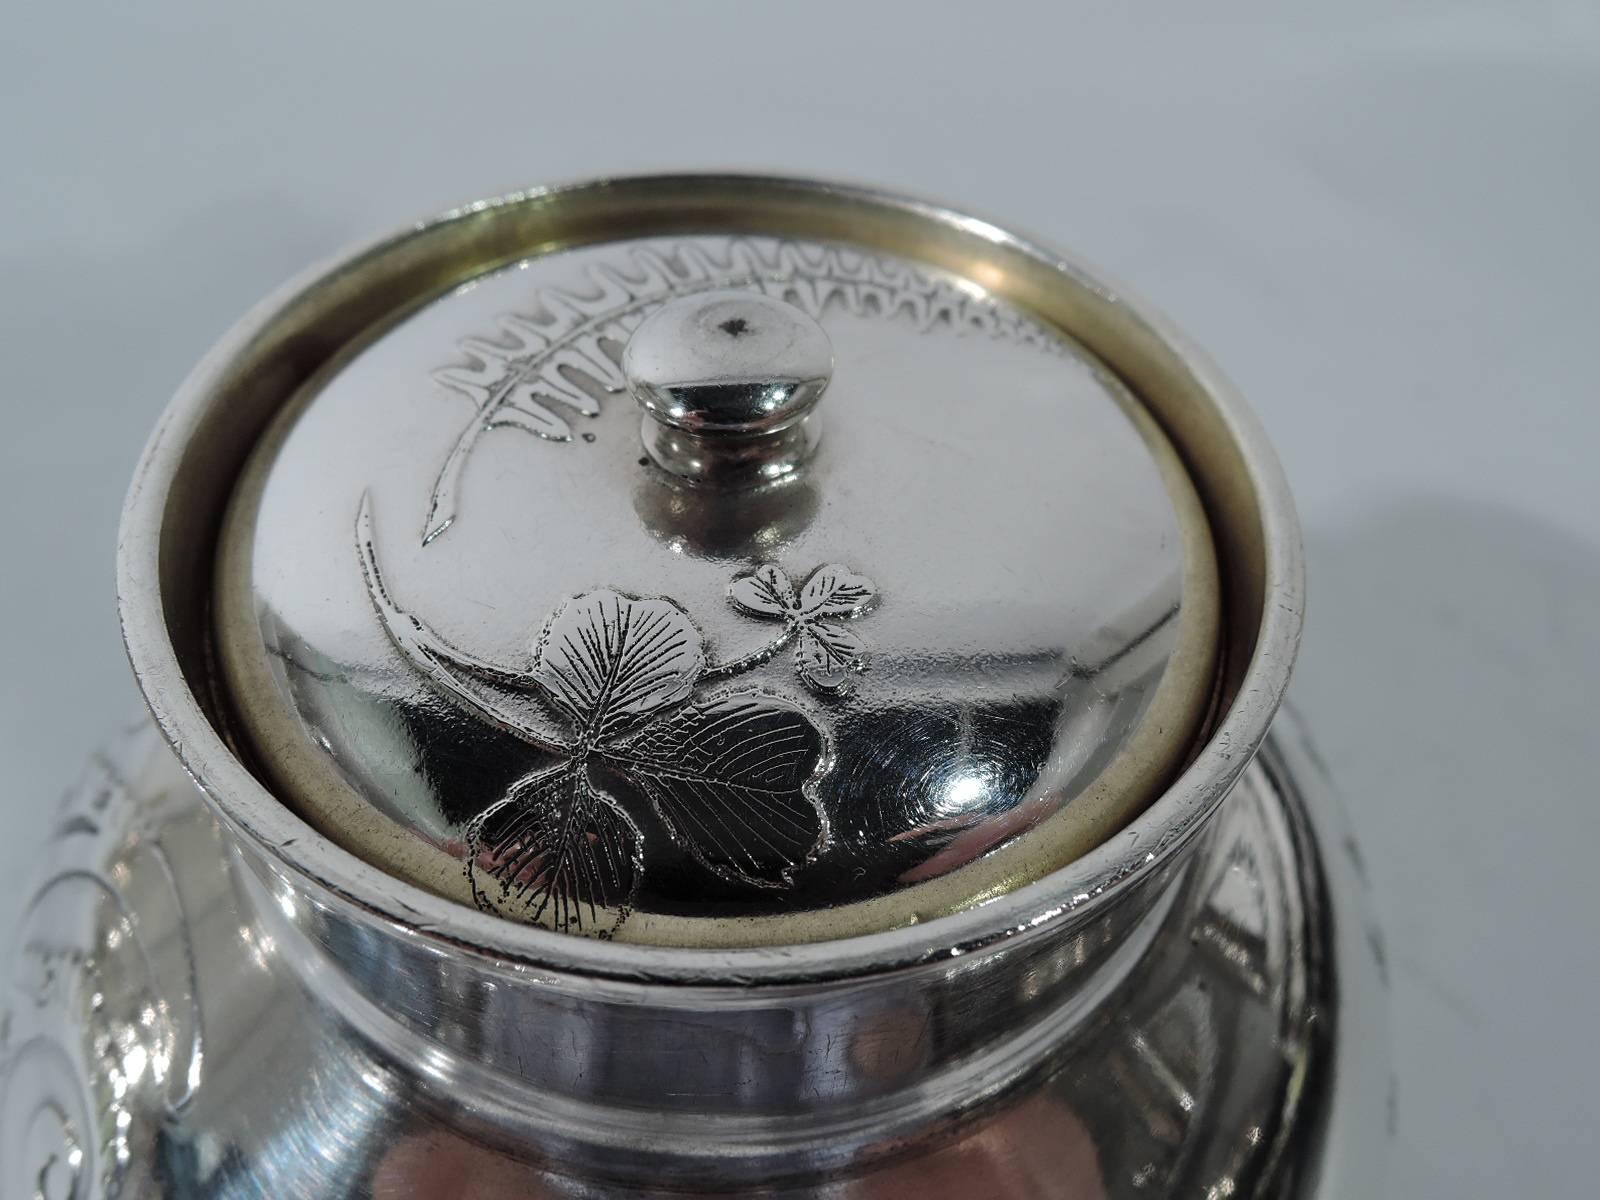 American Wonderful Tiffany Aesthetic Japonesque Sterling Silver Tea Caddy